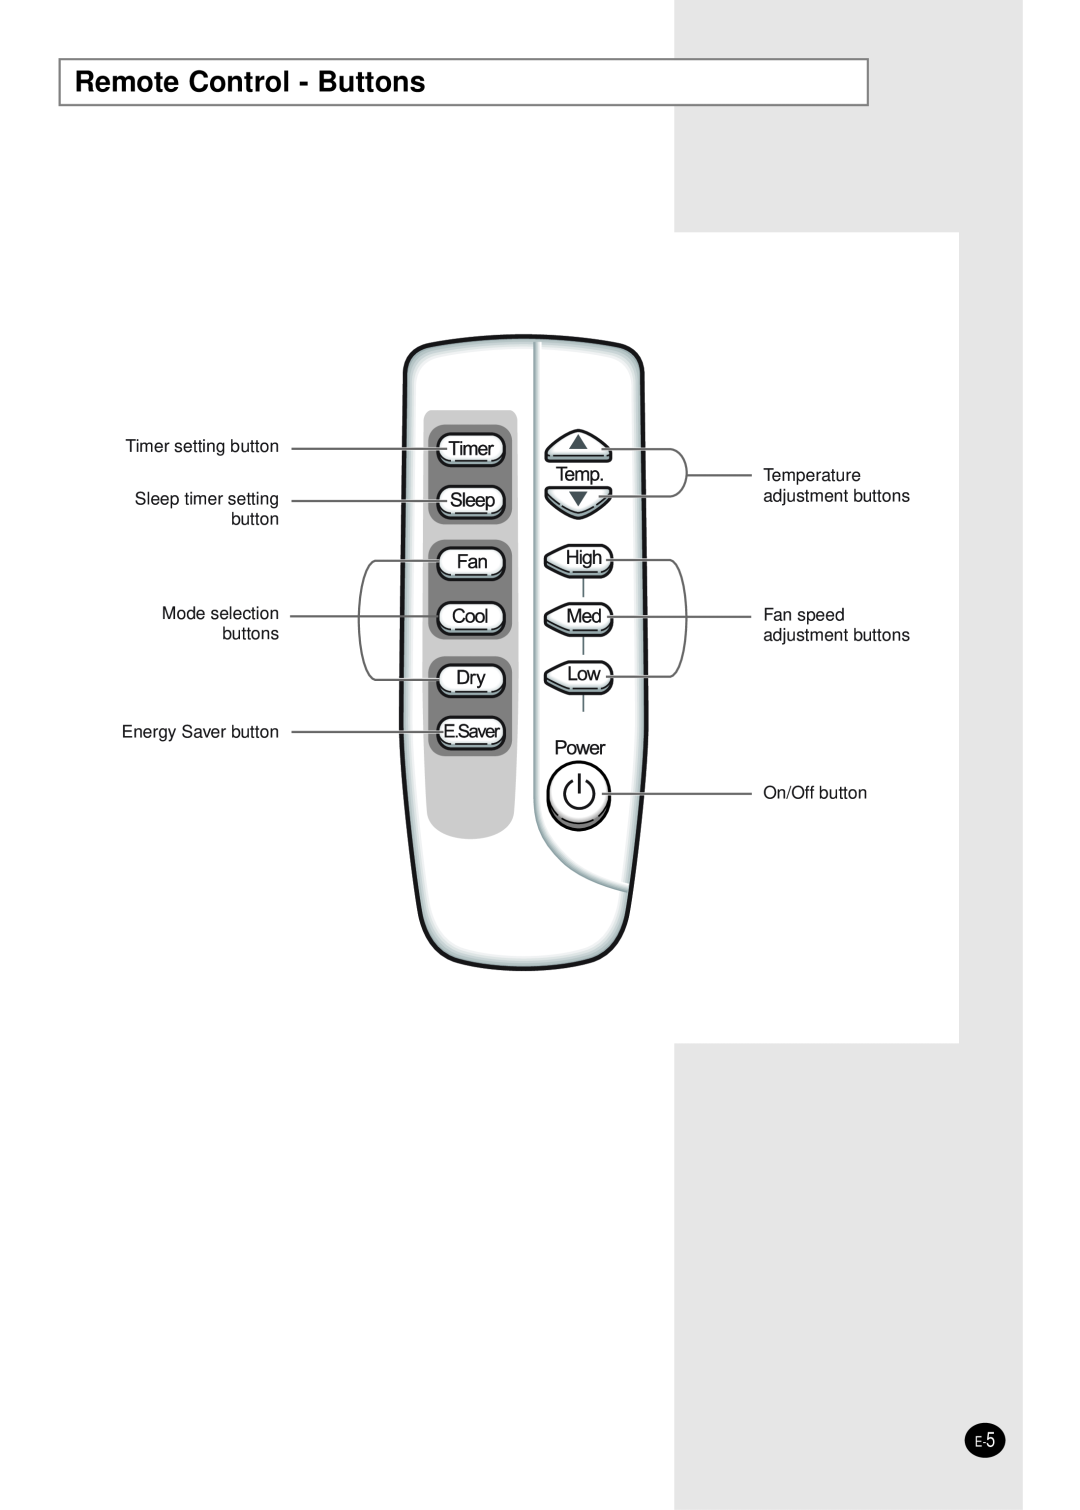 Samsung AW1805B Remote Control - Buttons, Timer setting button Sleep timer setting button, Temperature adjustment buttons 